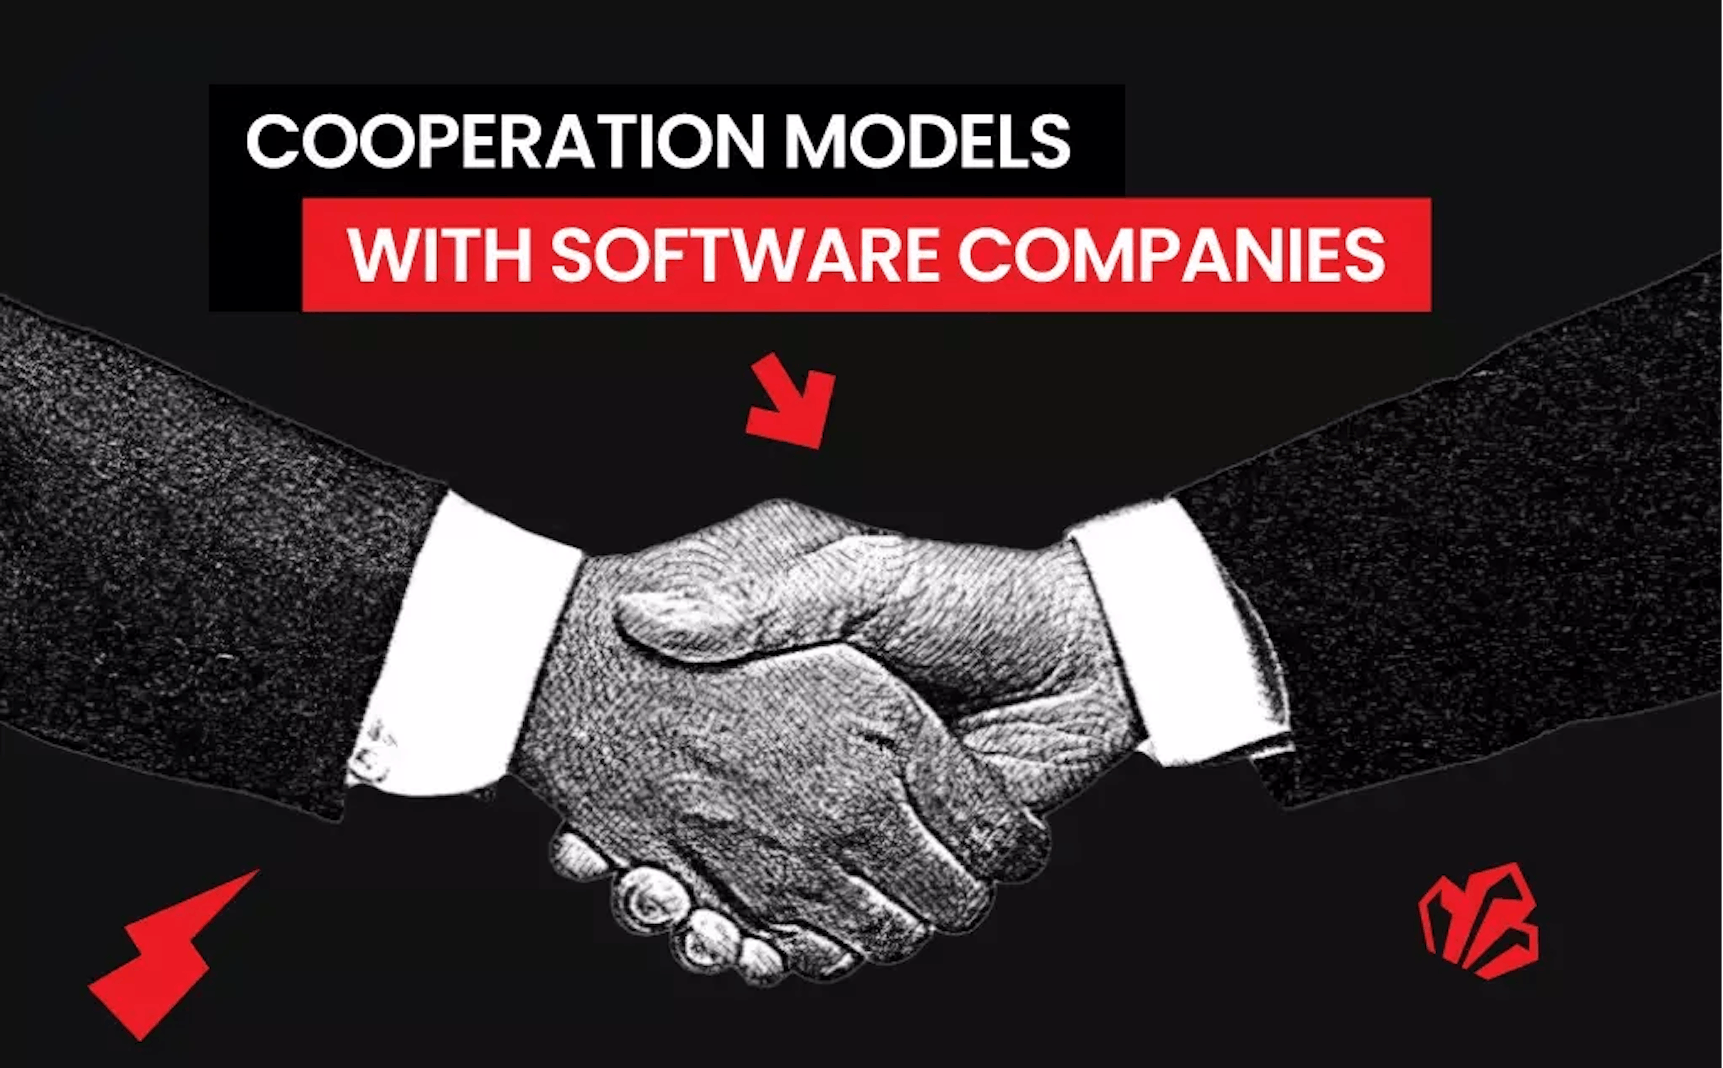 5. Cooperation Models With Software Companies